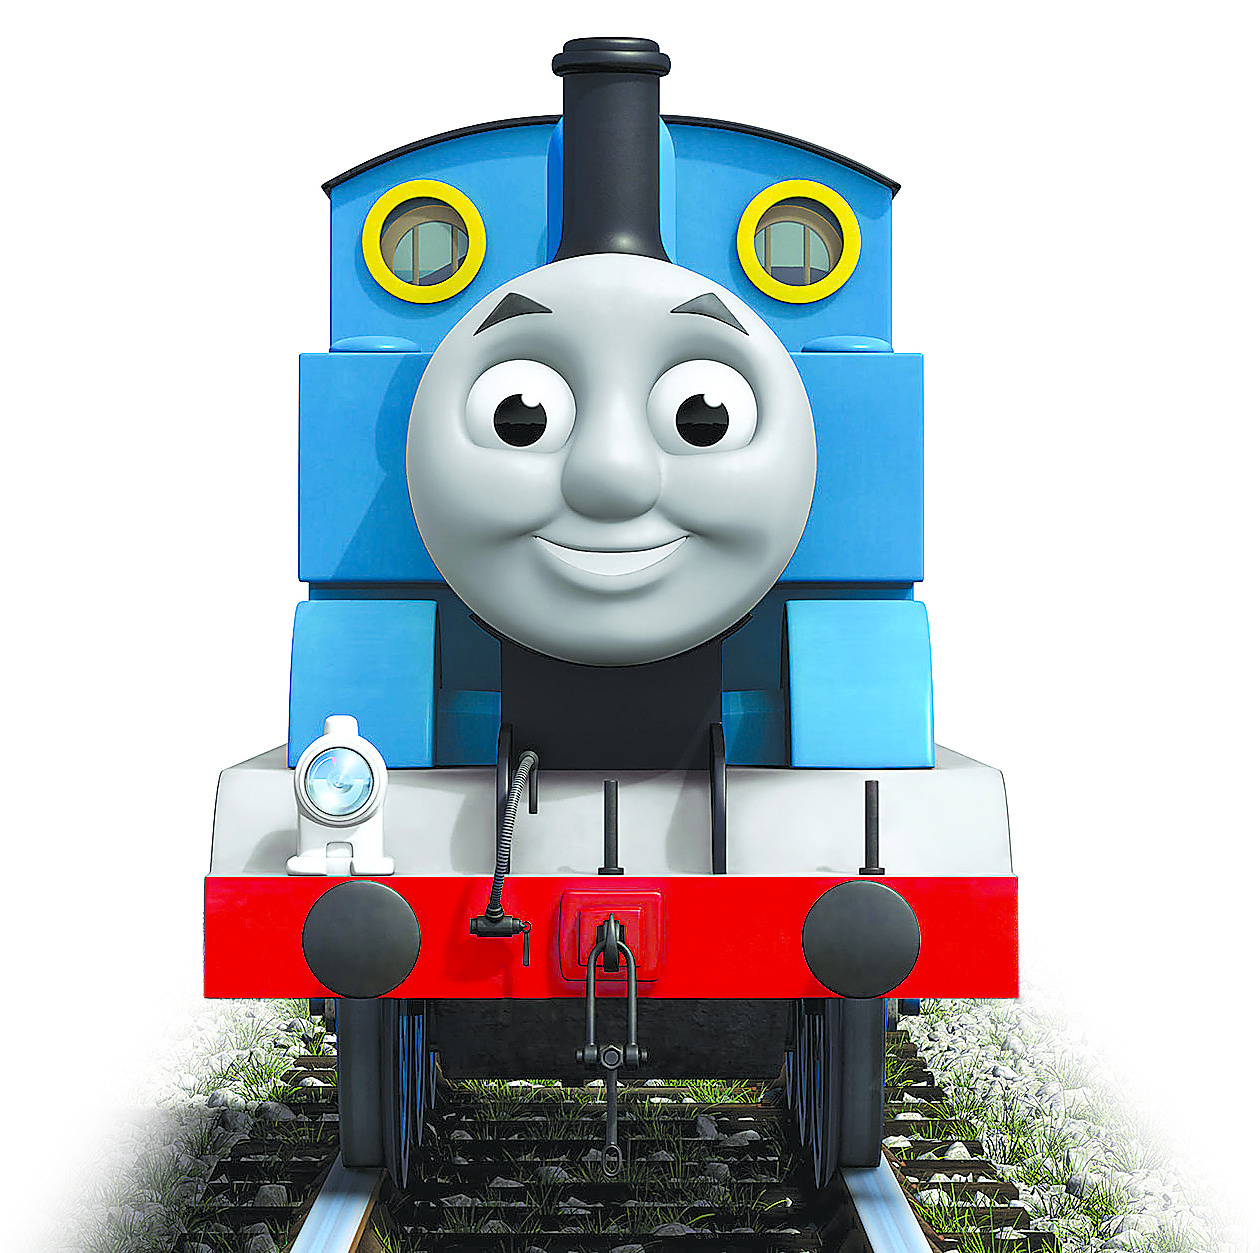 Thomas gets young kids on learning track The SpokesmanReview